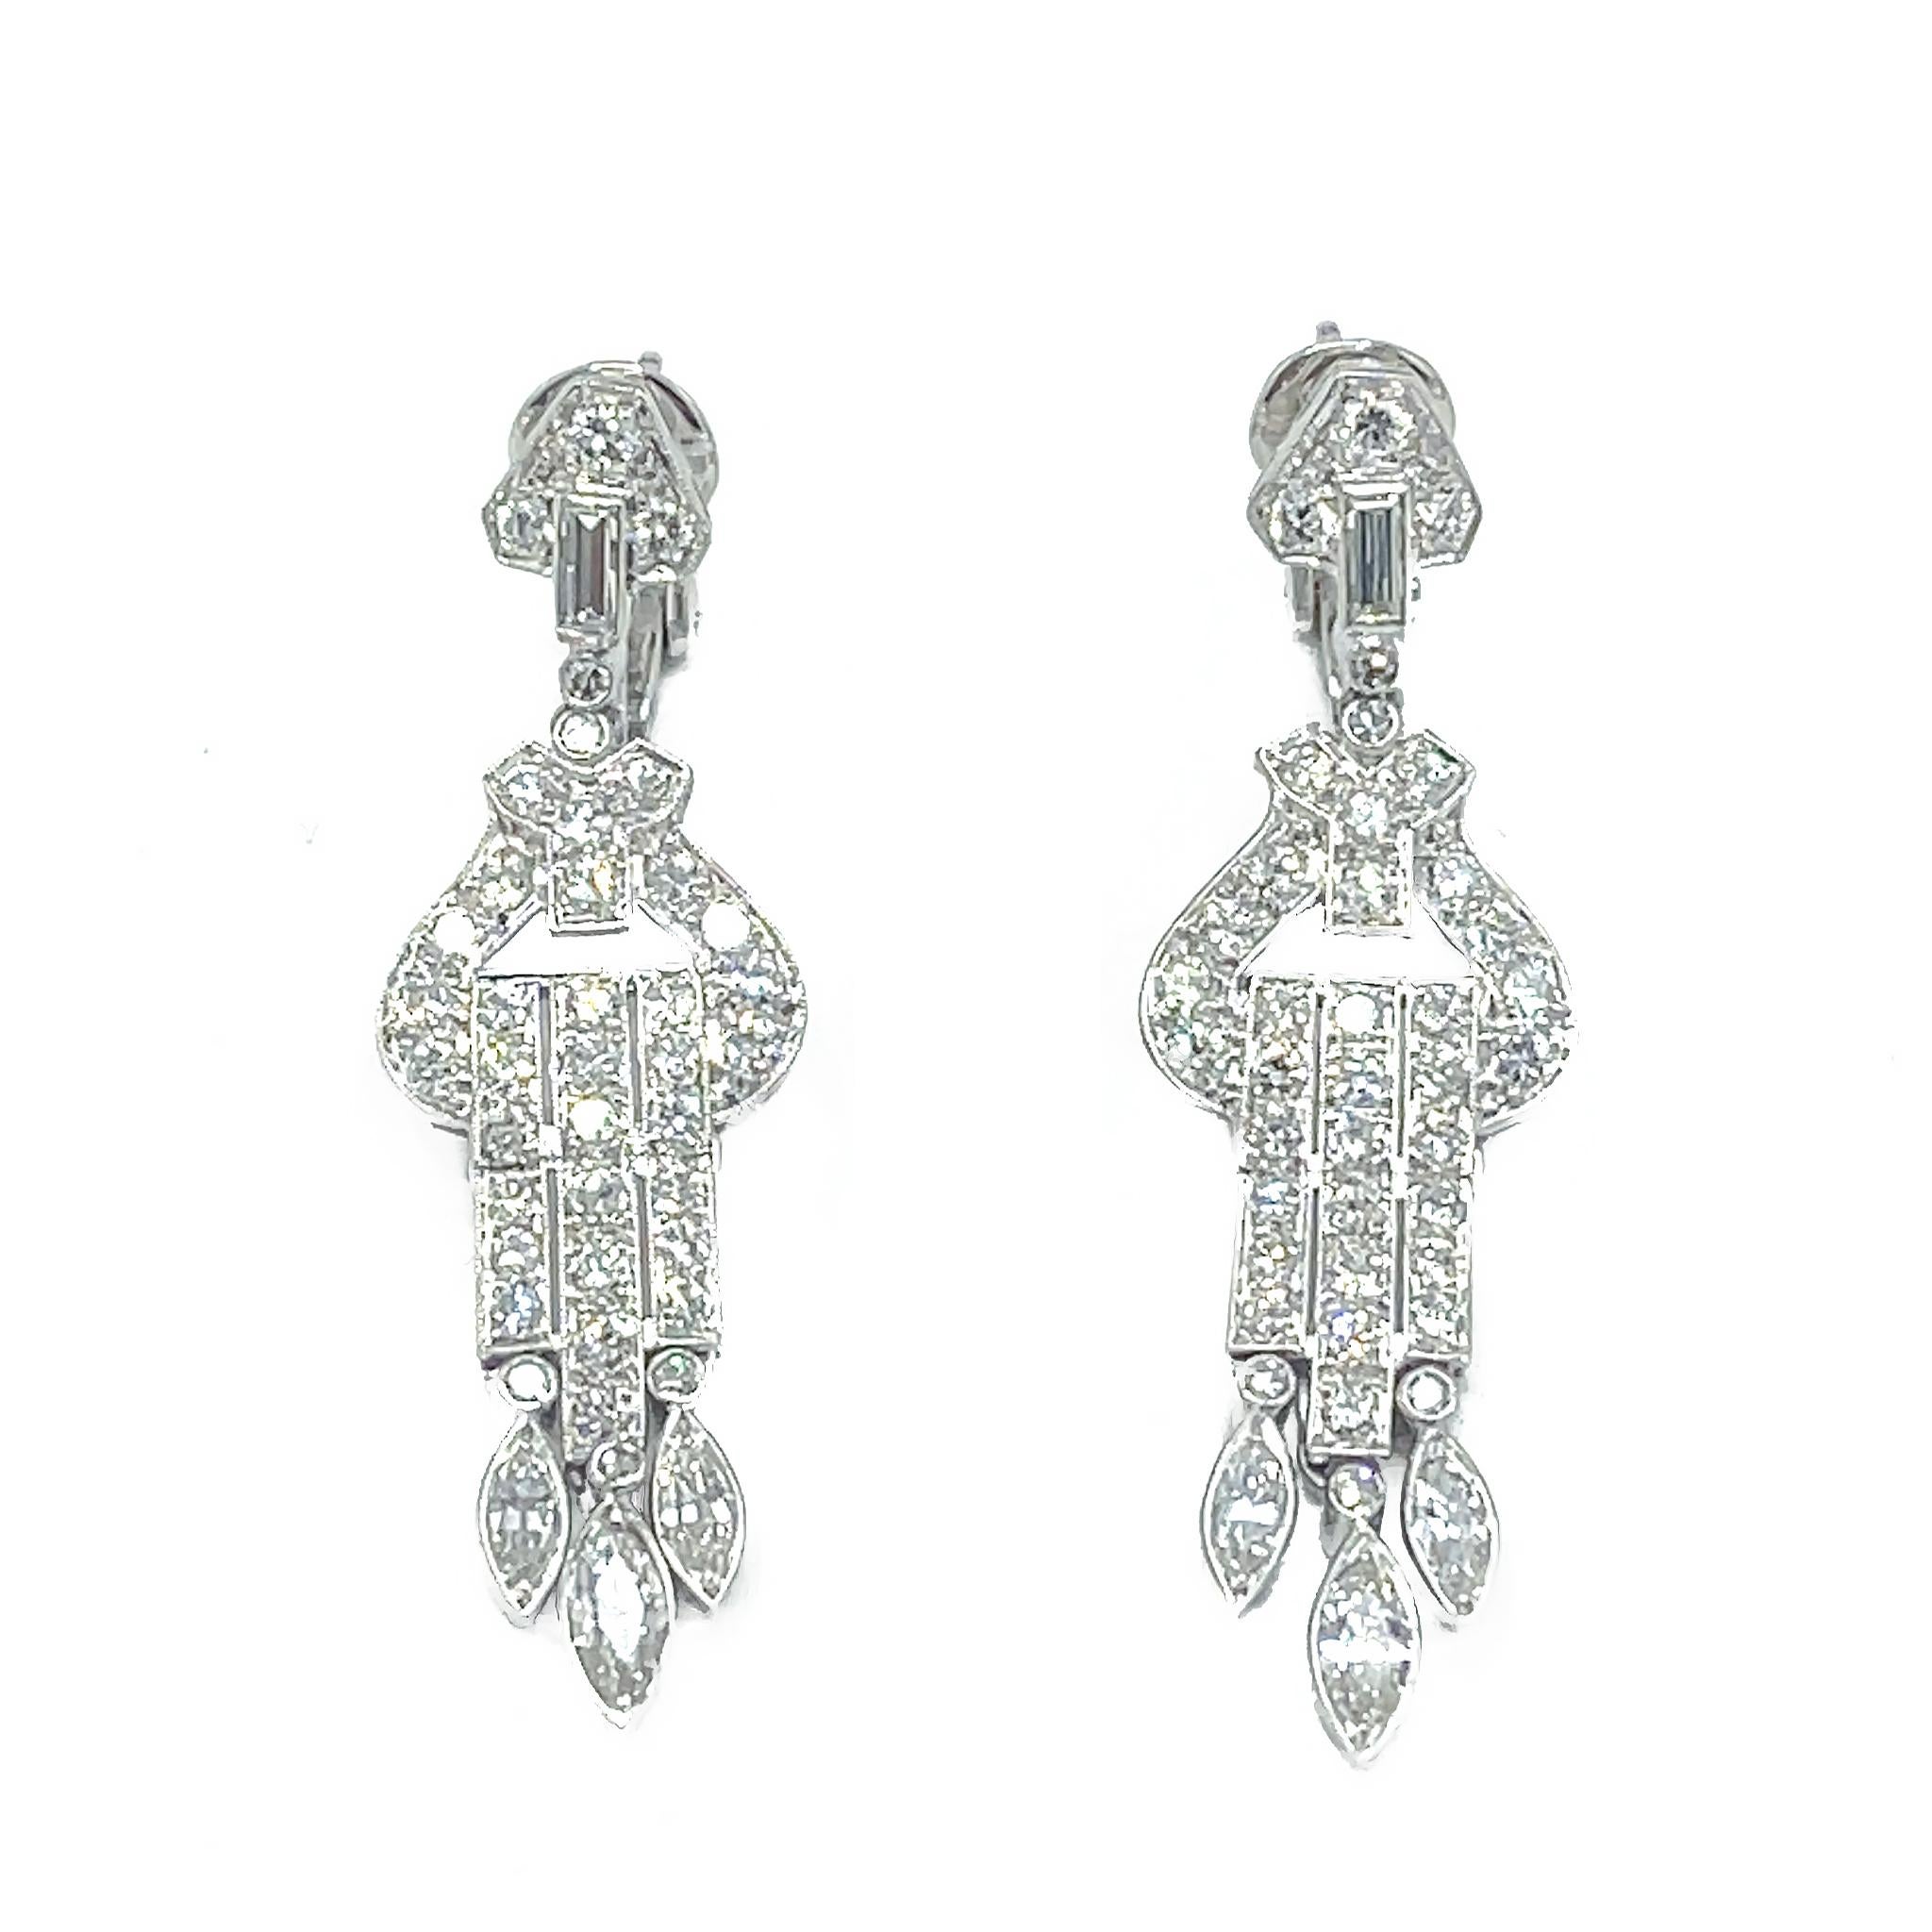 These magnificent hanging earrings create a seductive look and make you feel luxurious.  It's the perfect gift to mark a special occasion. 

Platinum
Diamond: 4.00 ct twd (estimated)
Length: 2 inches
Total Weight: 13 grams